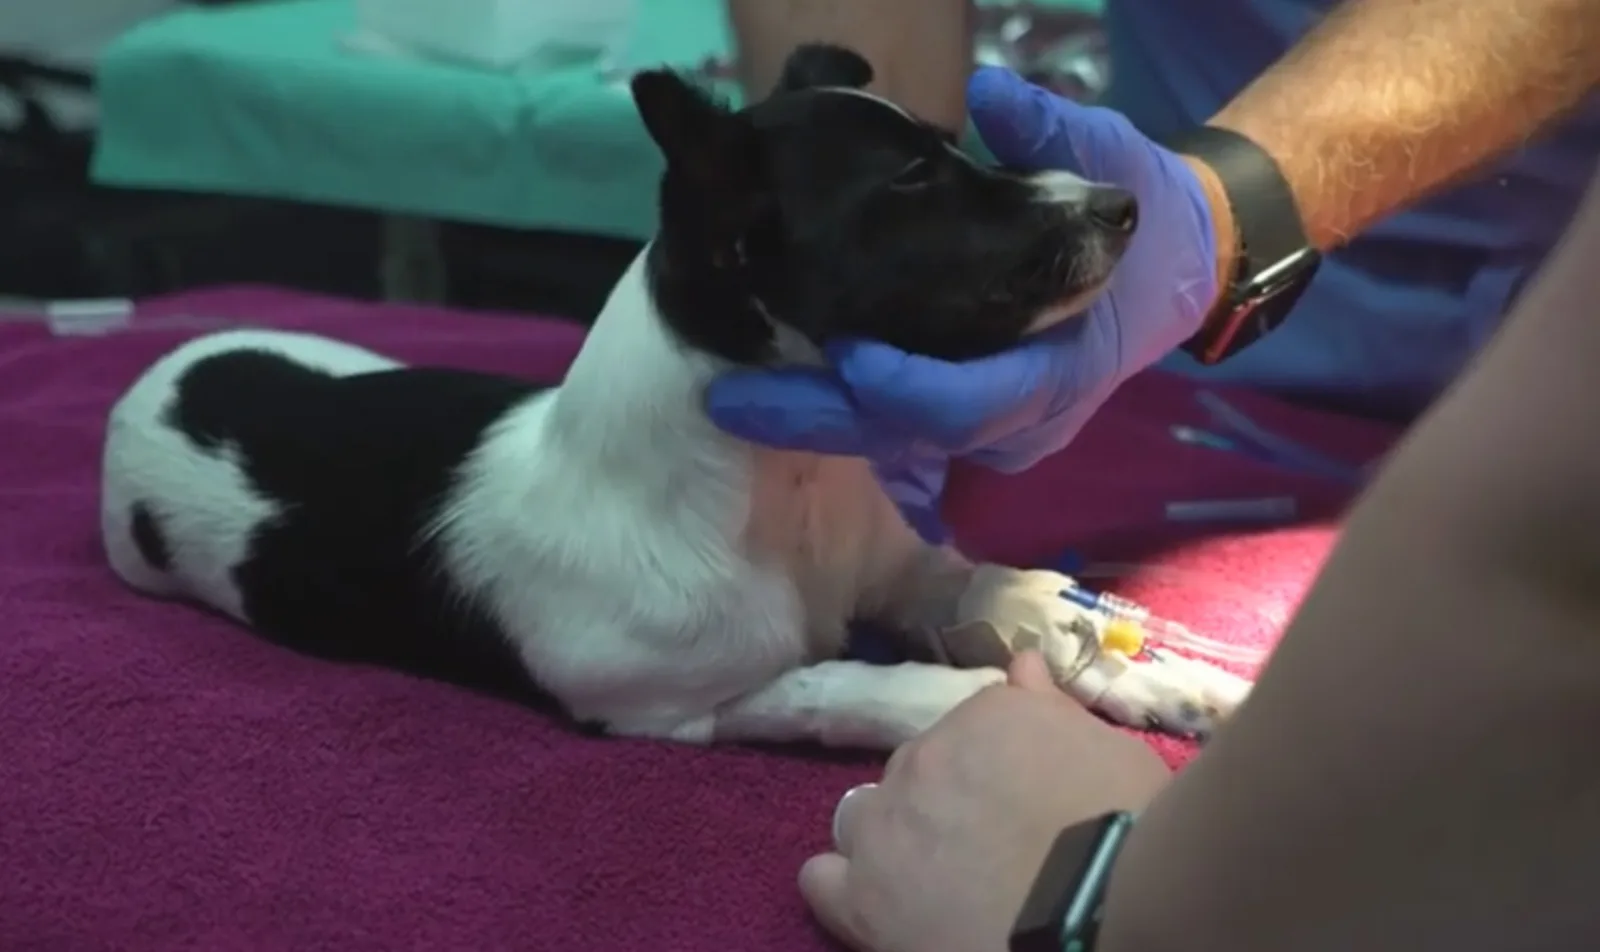 Video screenshot of a small black and white dog on an exam table being examined by veterinarians